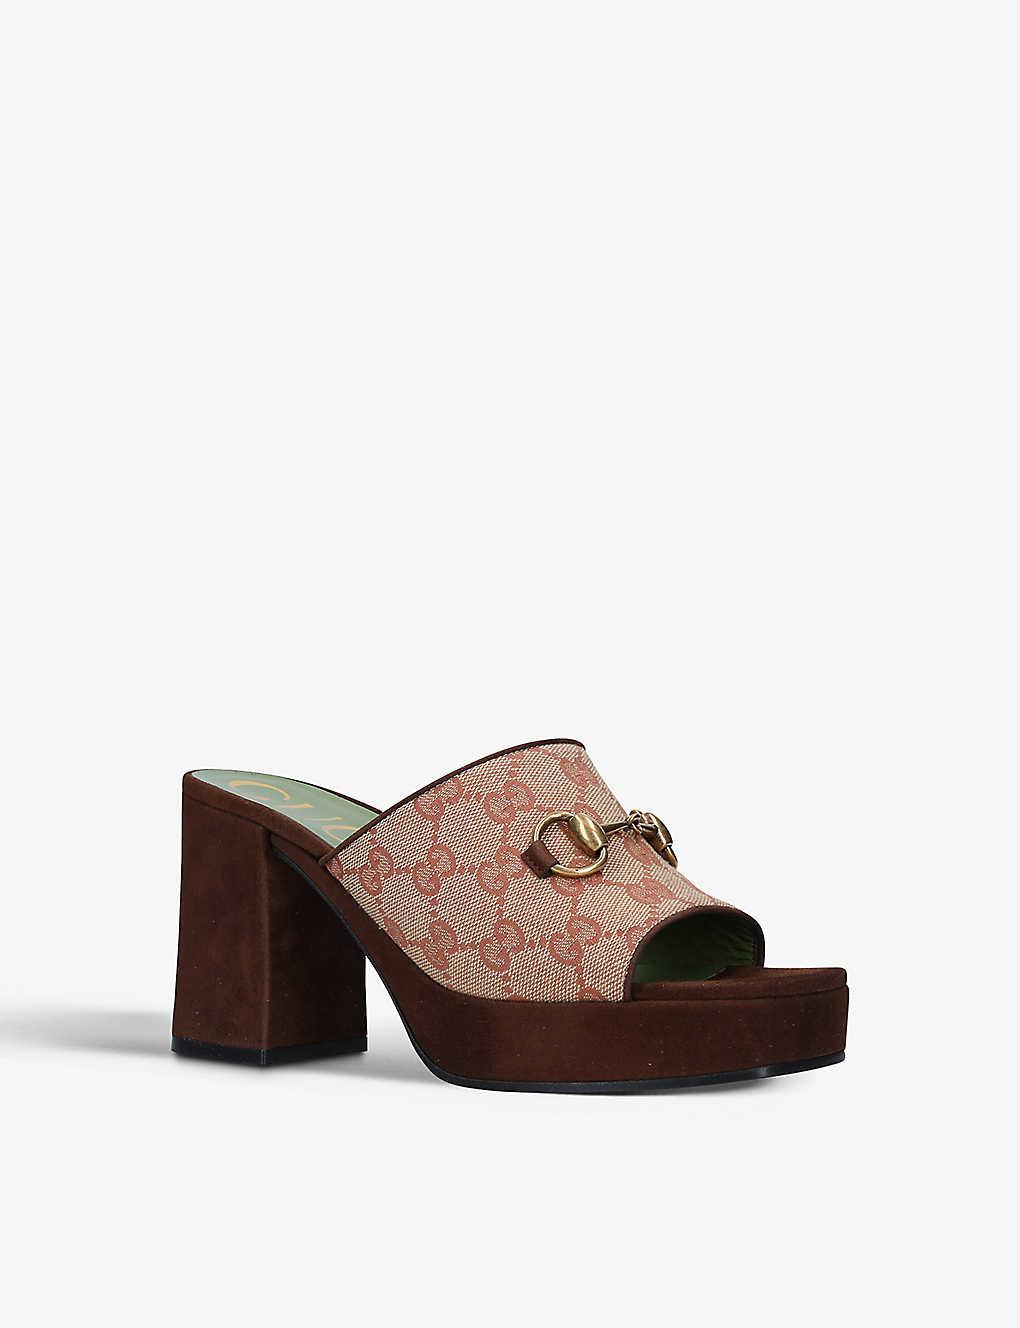 Gucci Houdan Canvas And Suede Platform Sandals in Brown | Lyst